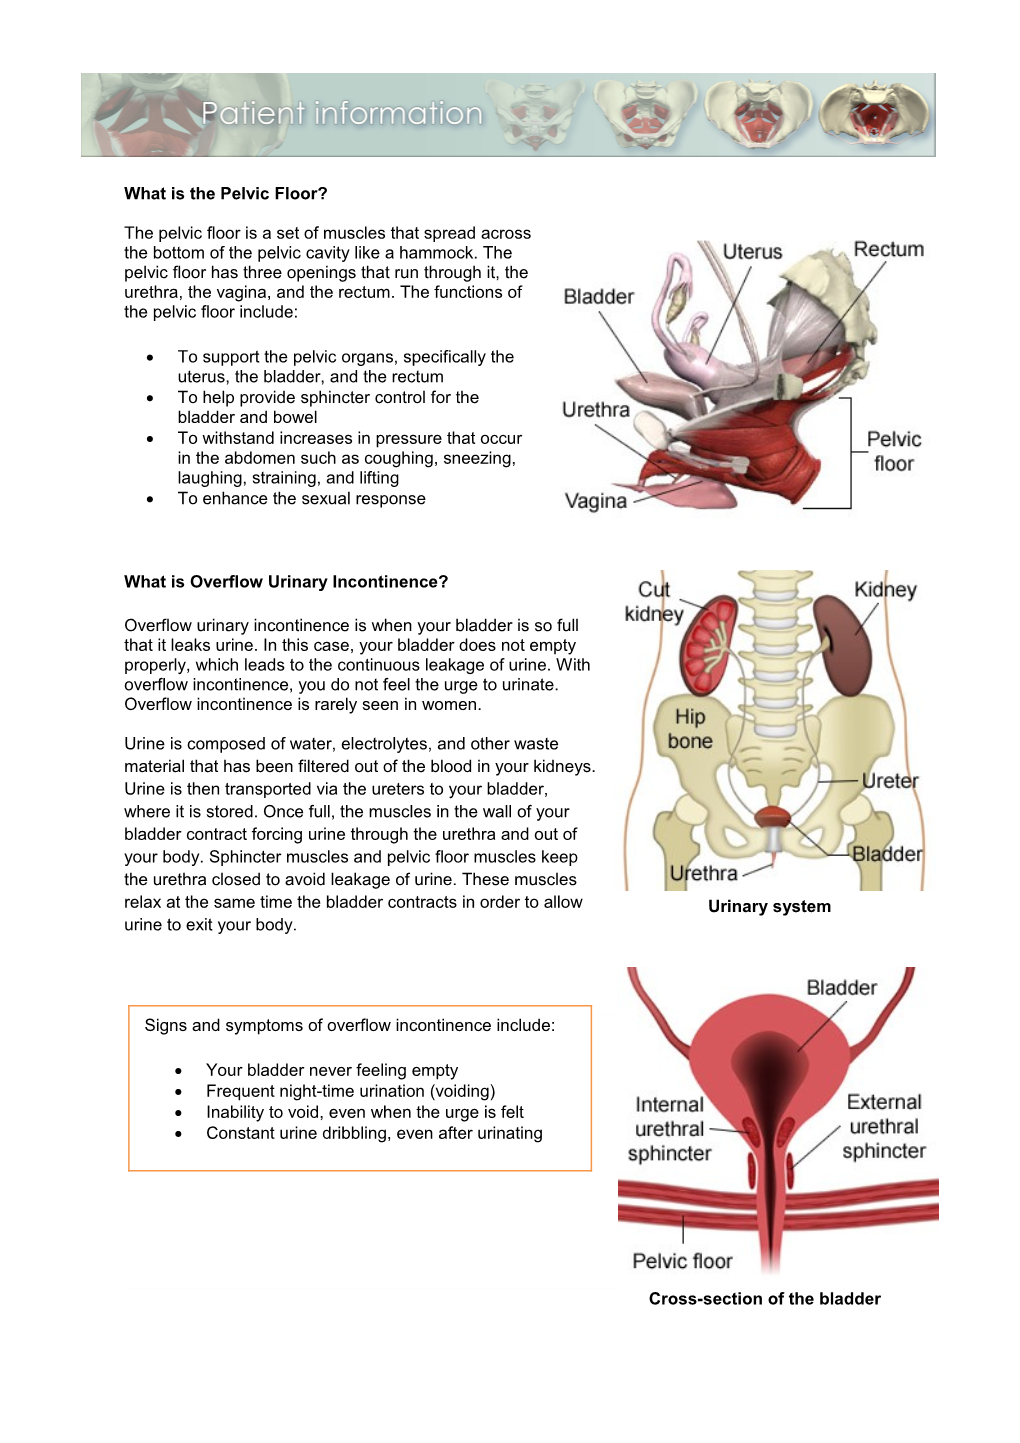 What Is the Pelvic Floor? the Pelvic Floor Is a Set of Muscles That Spread Across The